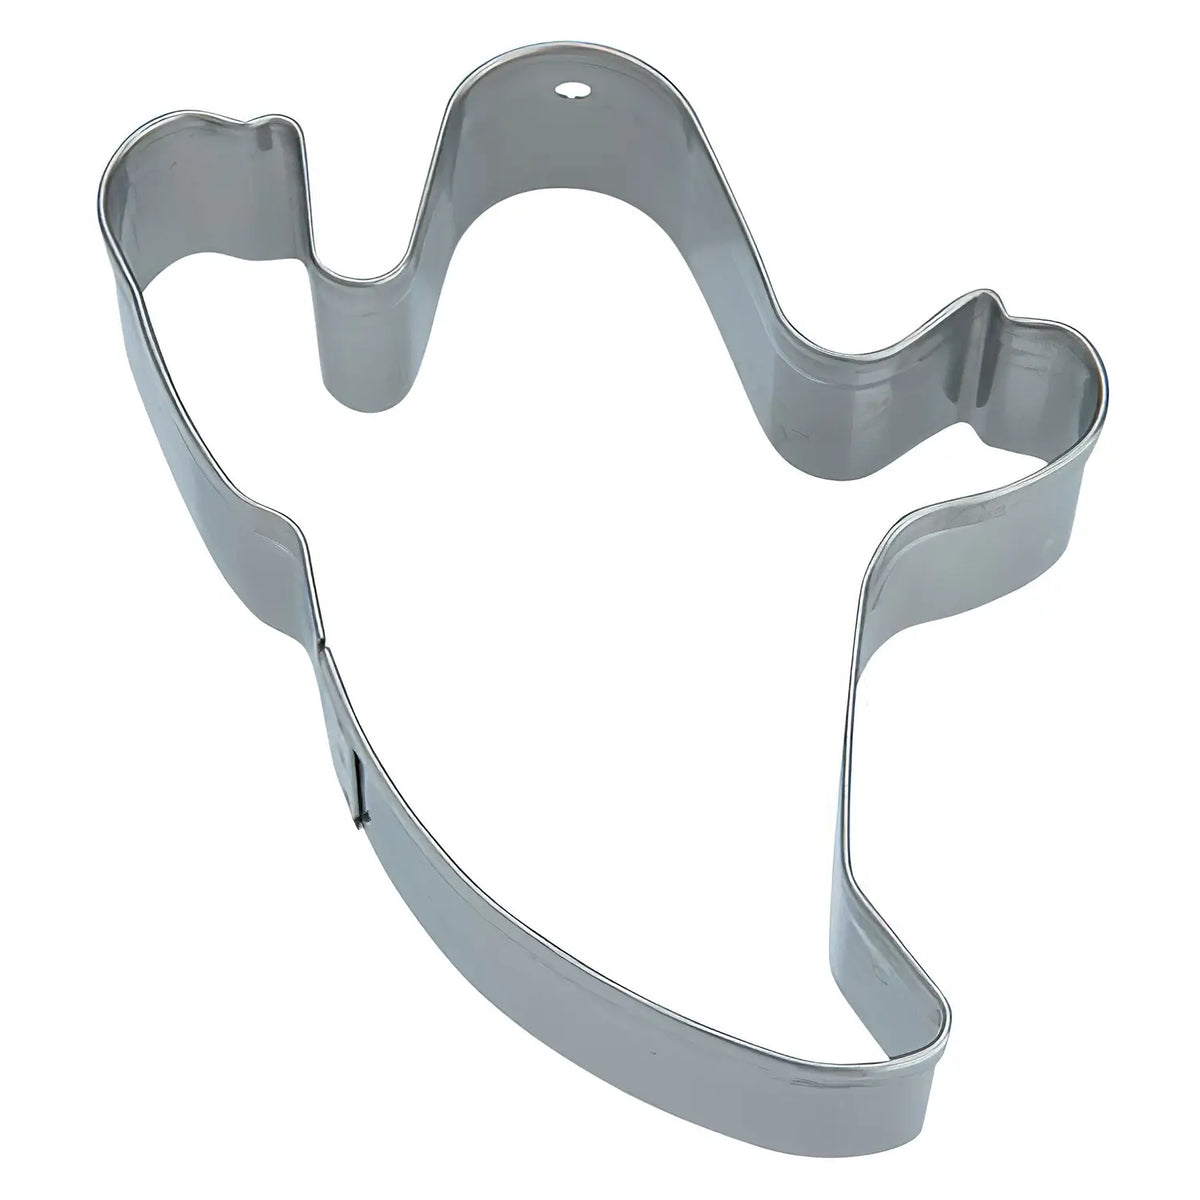 TIGERCROWN Cake Land Stainless Steel Cookie Cutter Ghost